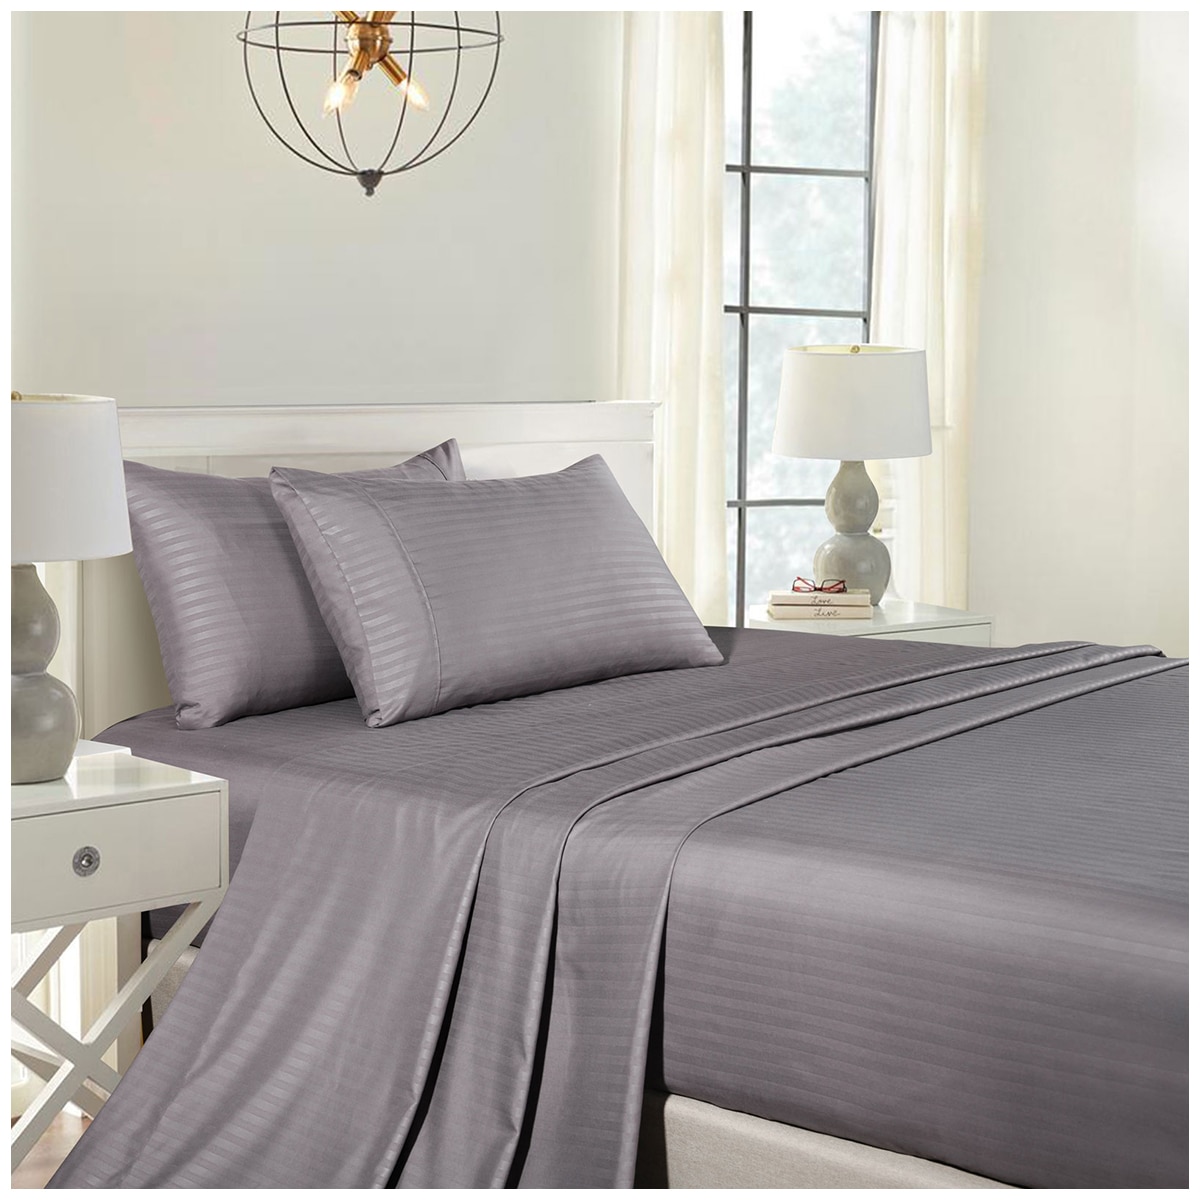 Bdirect Royal Comfort Blended Bamboo Sheet Set with stripes Double - Charcoal